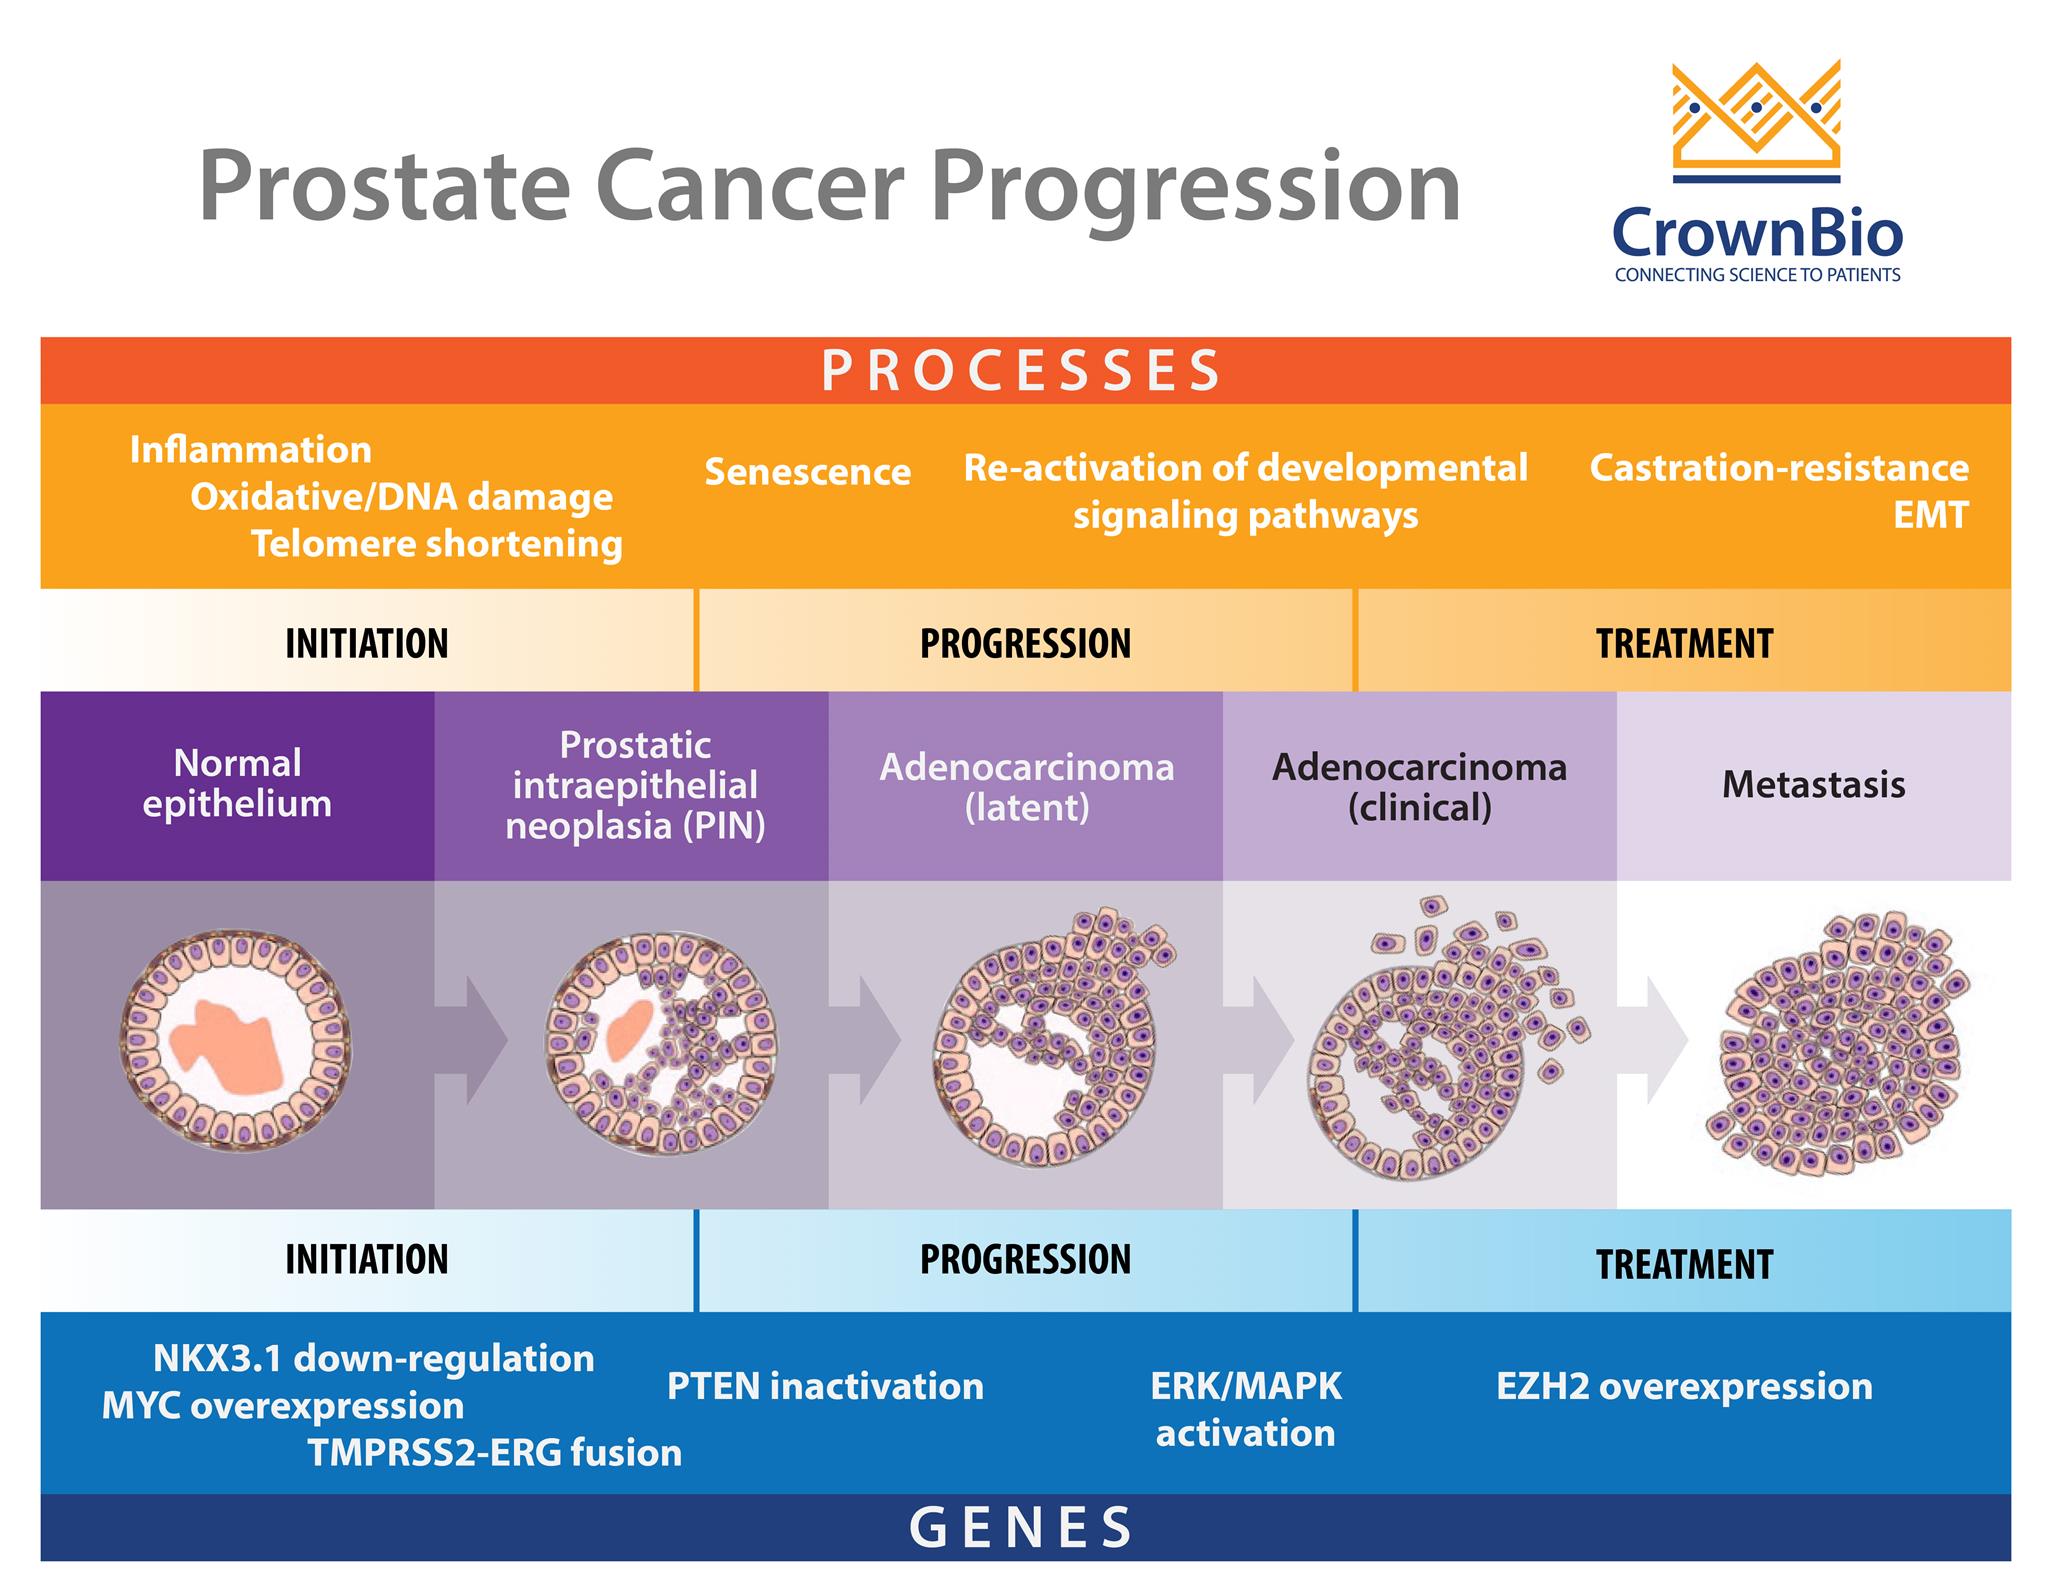 progression of prostate cancer from initiation to metastatic, castration resistant disease, including genetic alterations and cellular processes